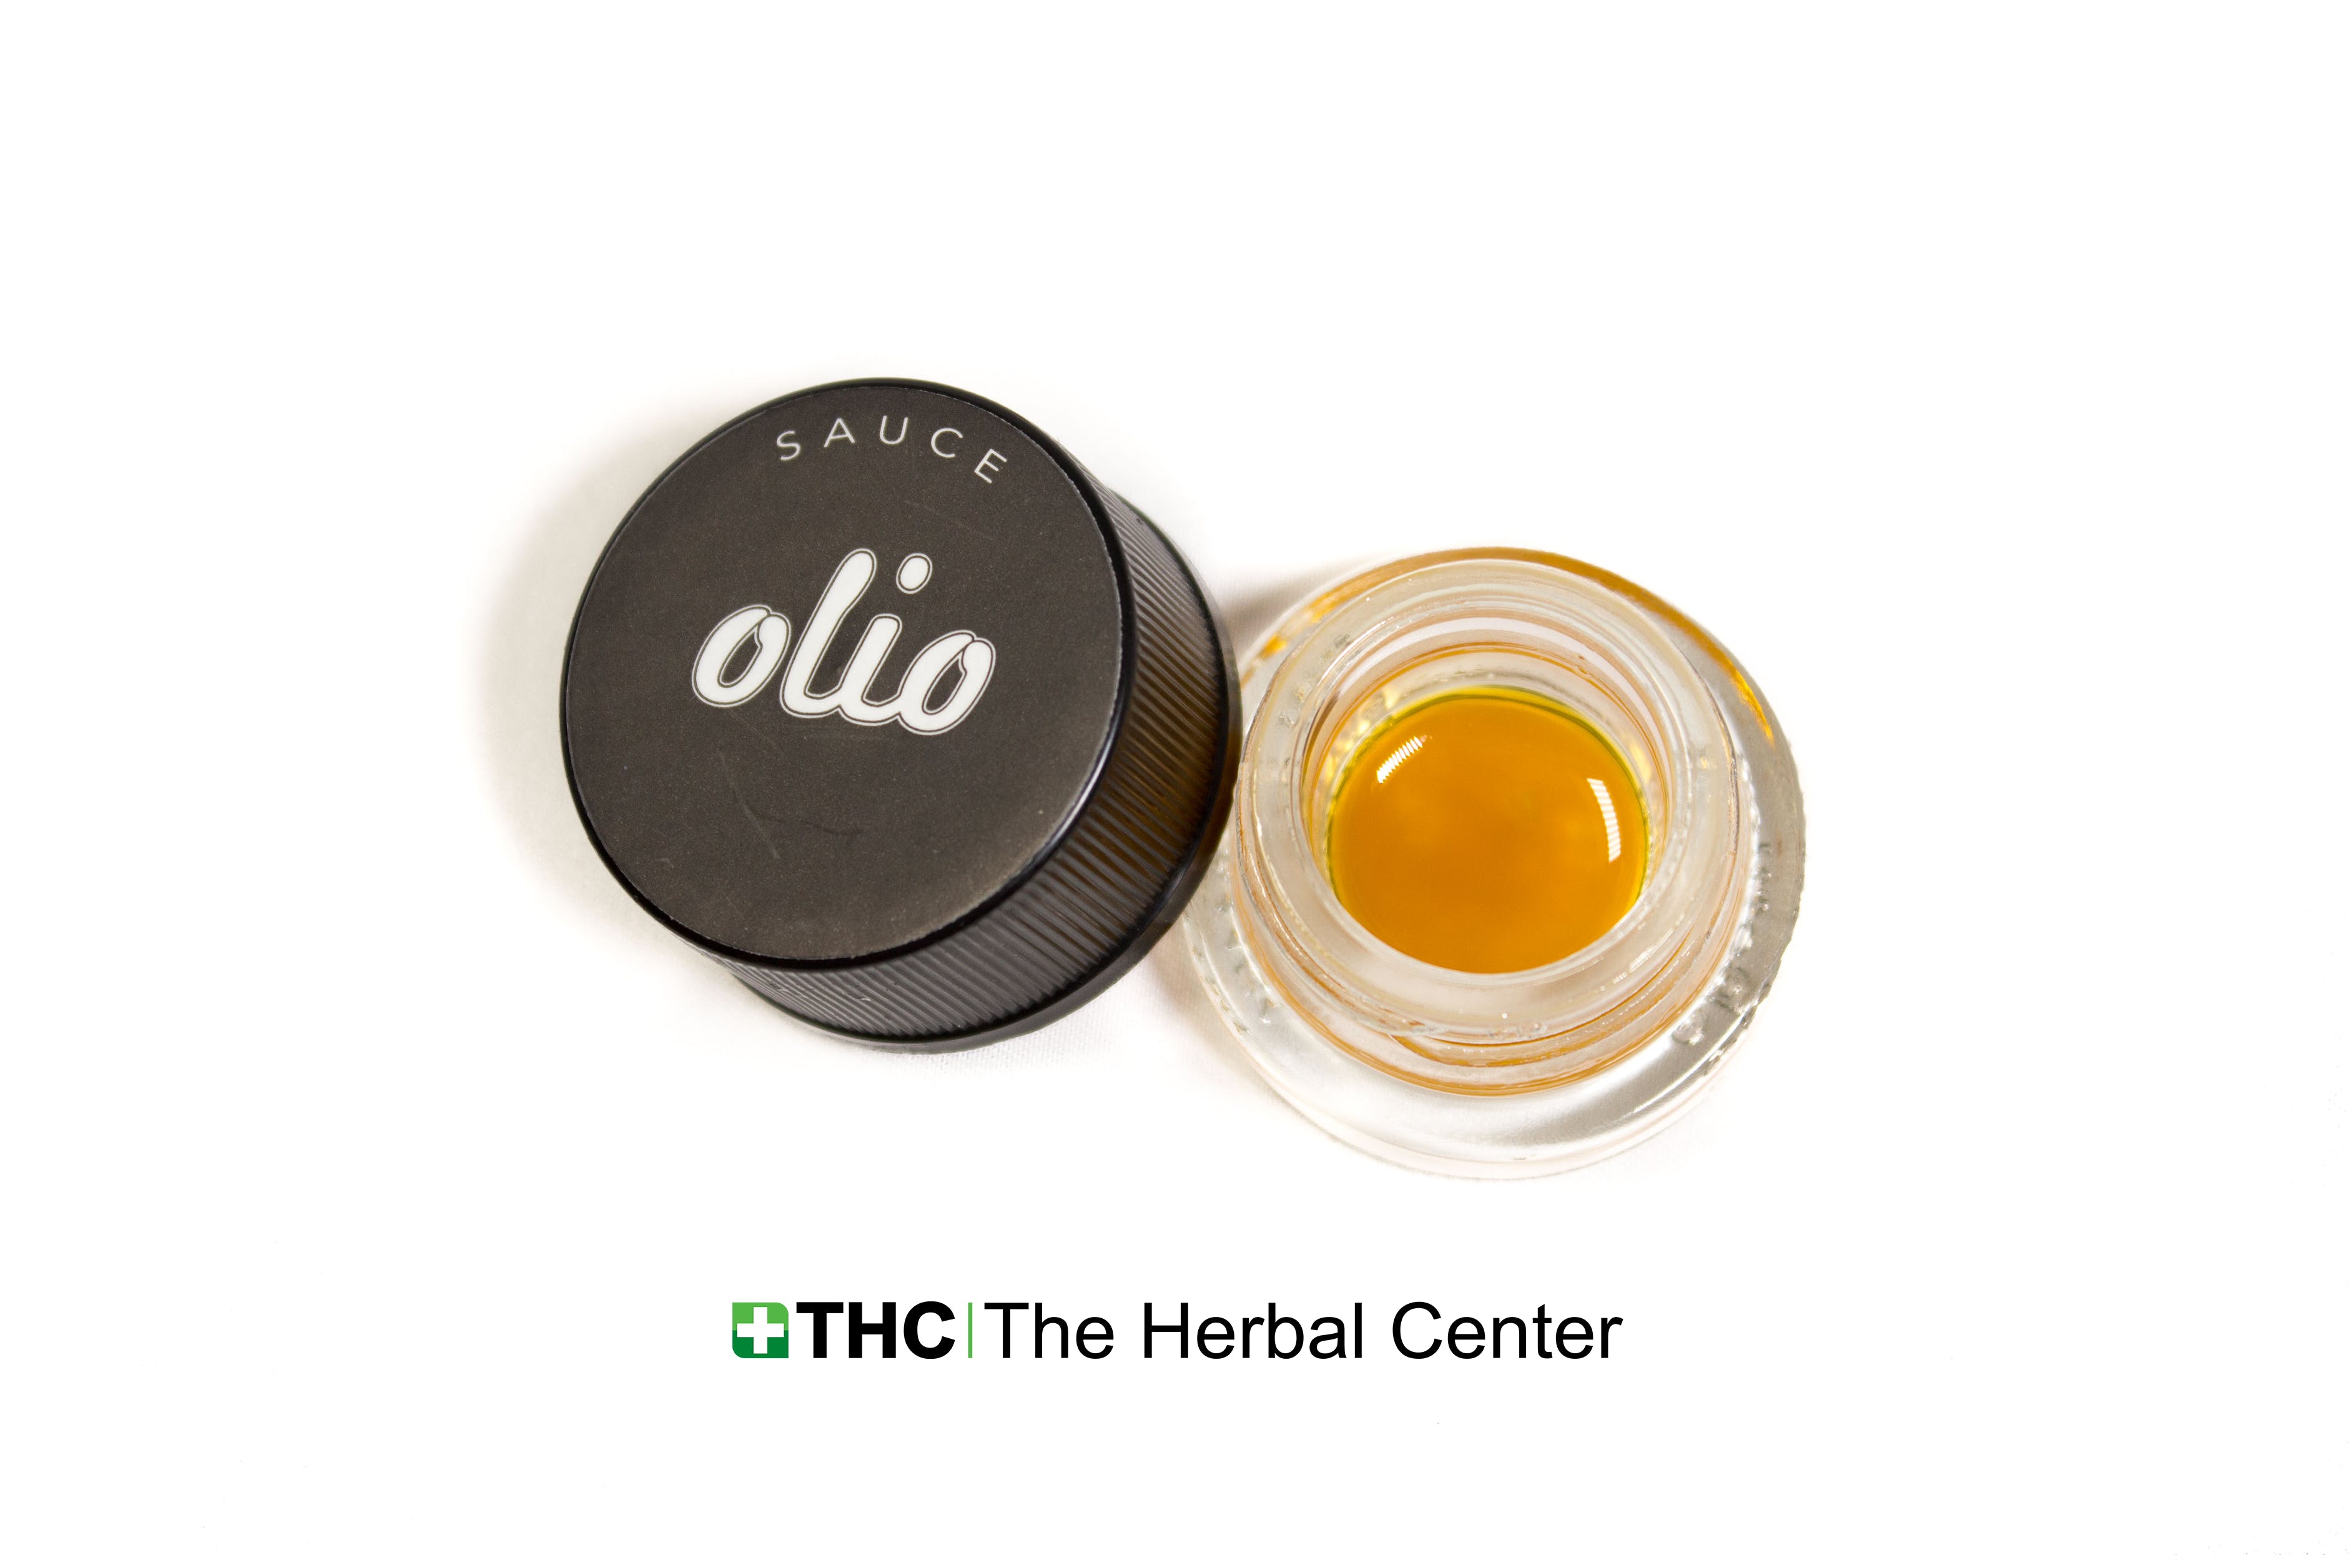 concentrate-olio-sauce-chem-brulee